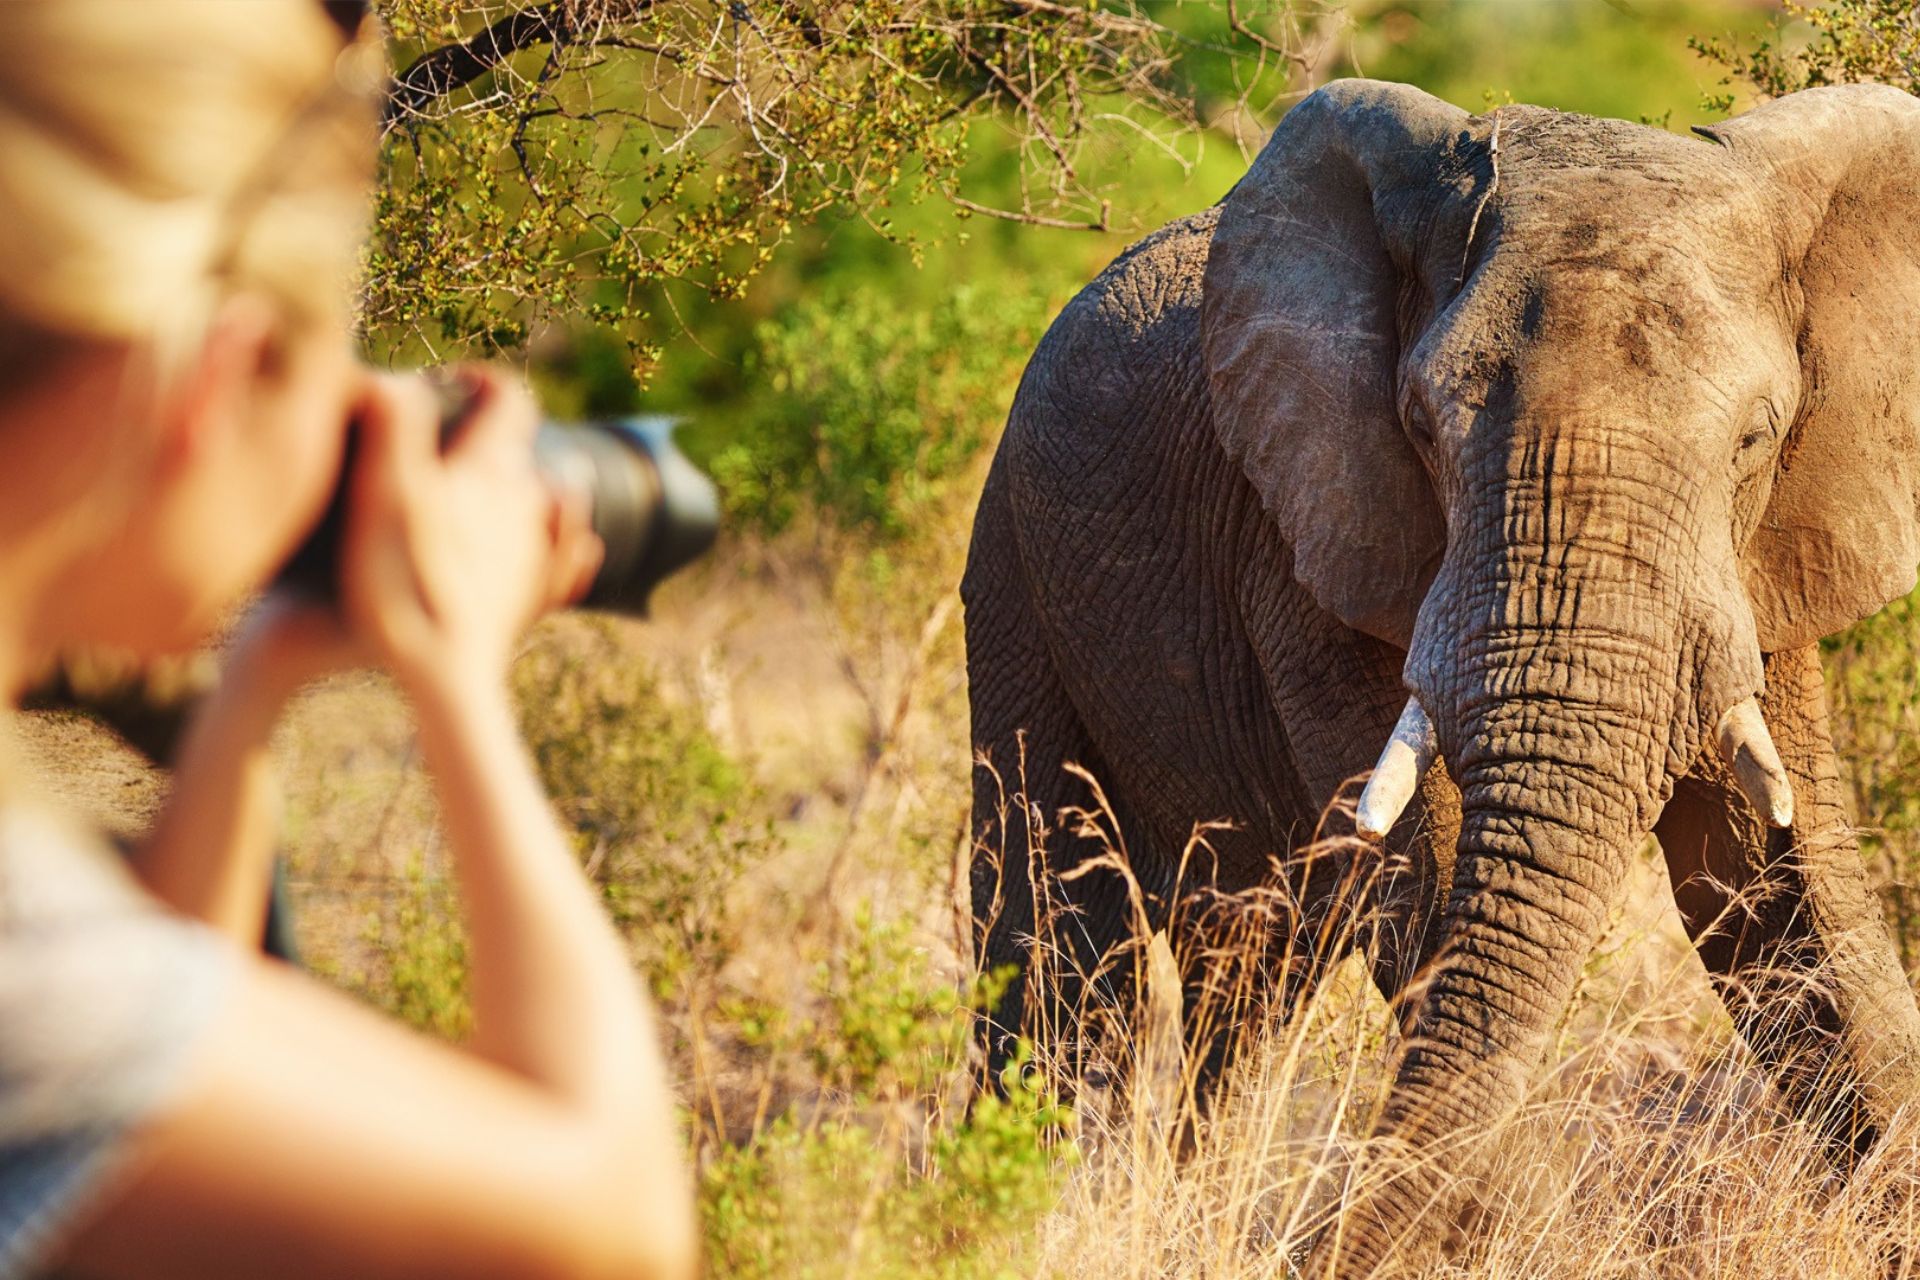 A photographer taking pictures of an elephant on a luxury African Safari trip